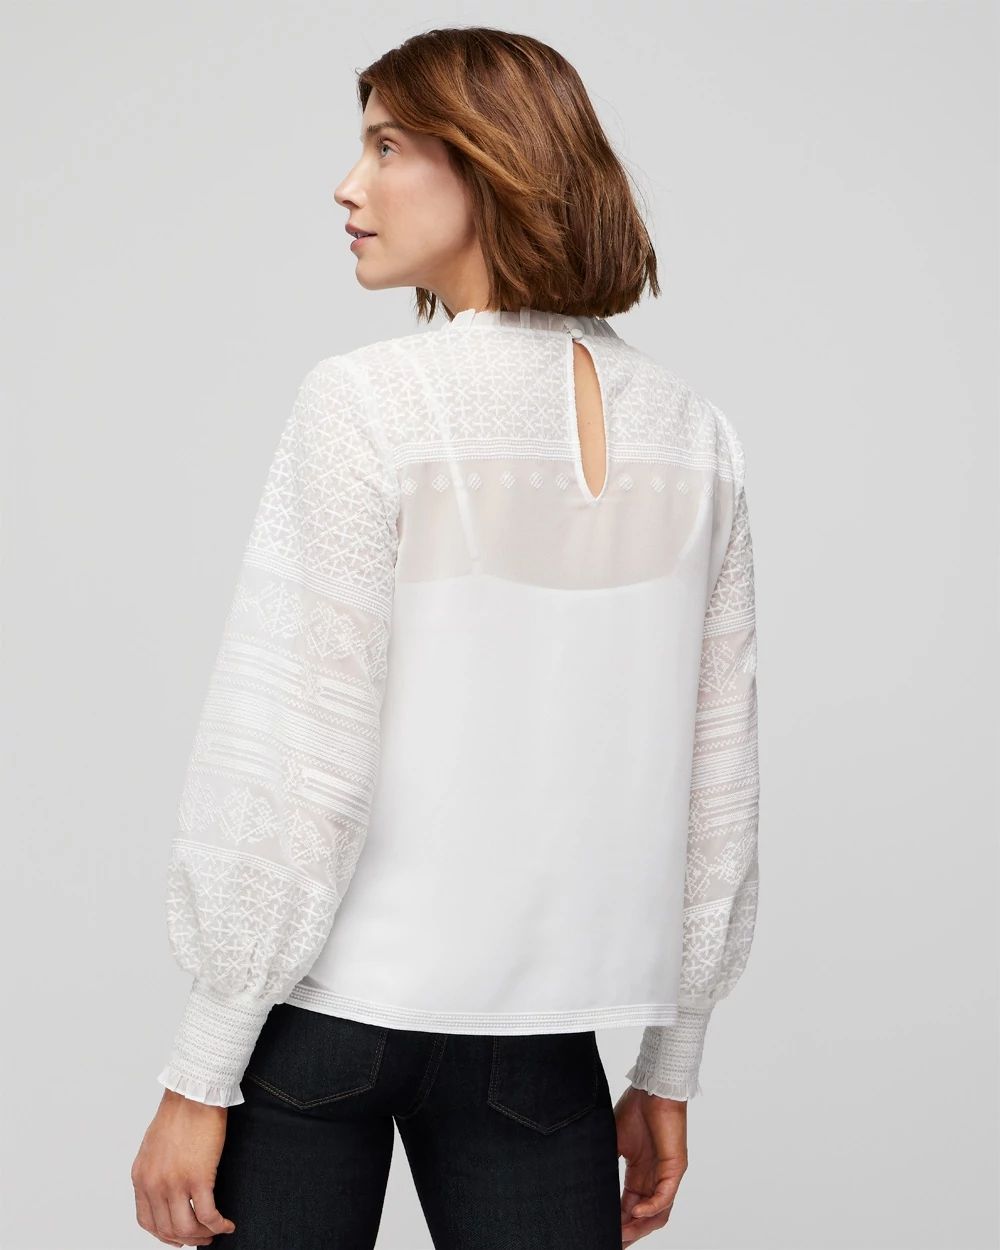 Long Sleeve Embroidered Blouse click to view larger image.